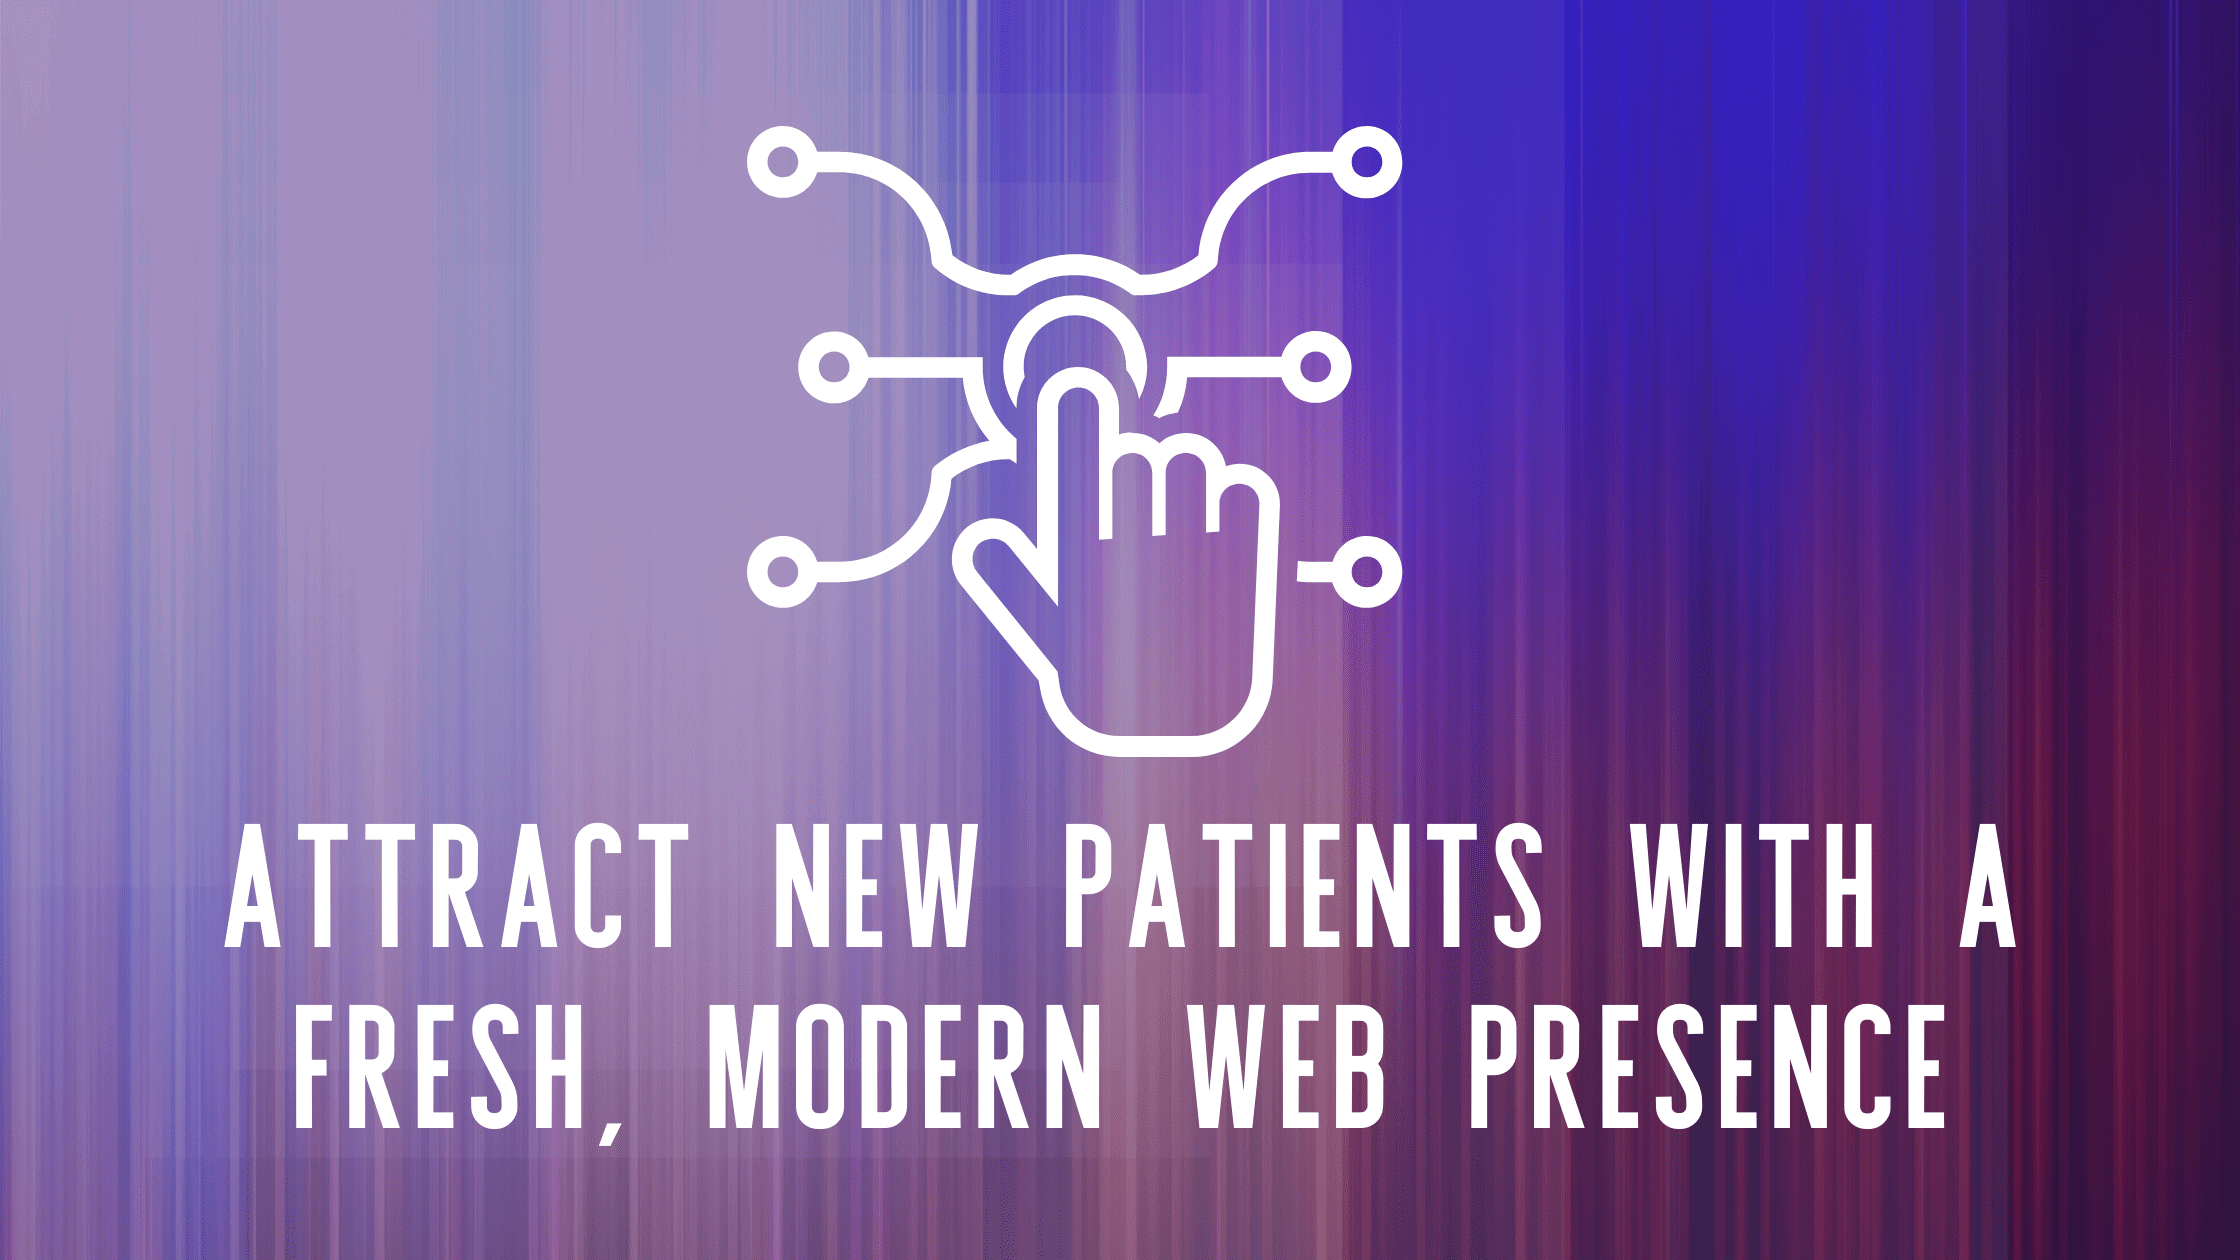 Attract New Patients with a Fresh, Modern Web Presence